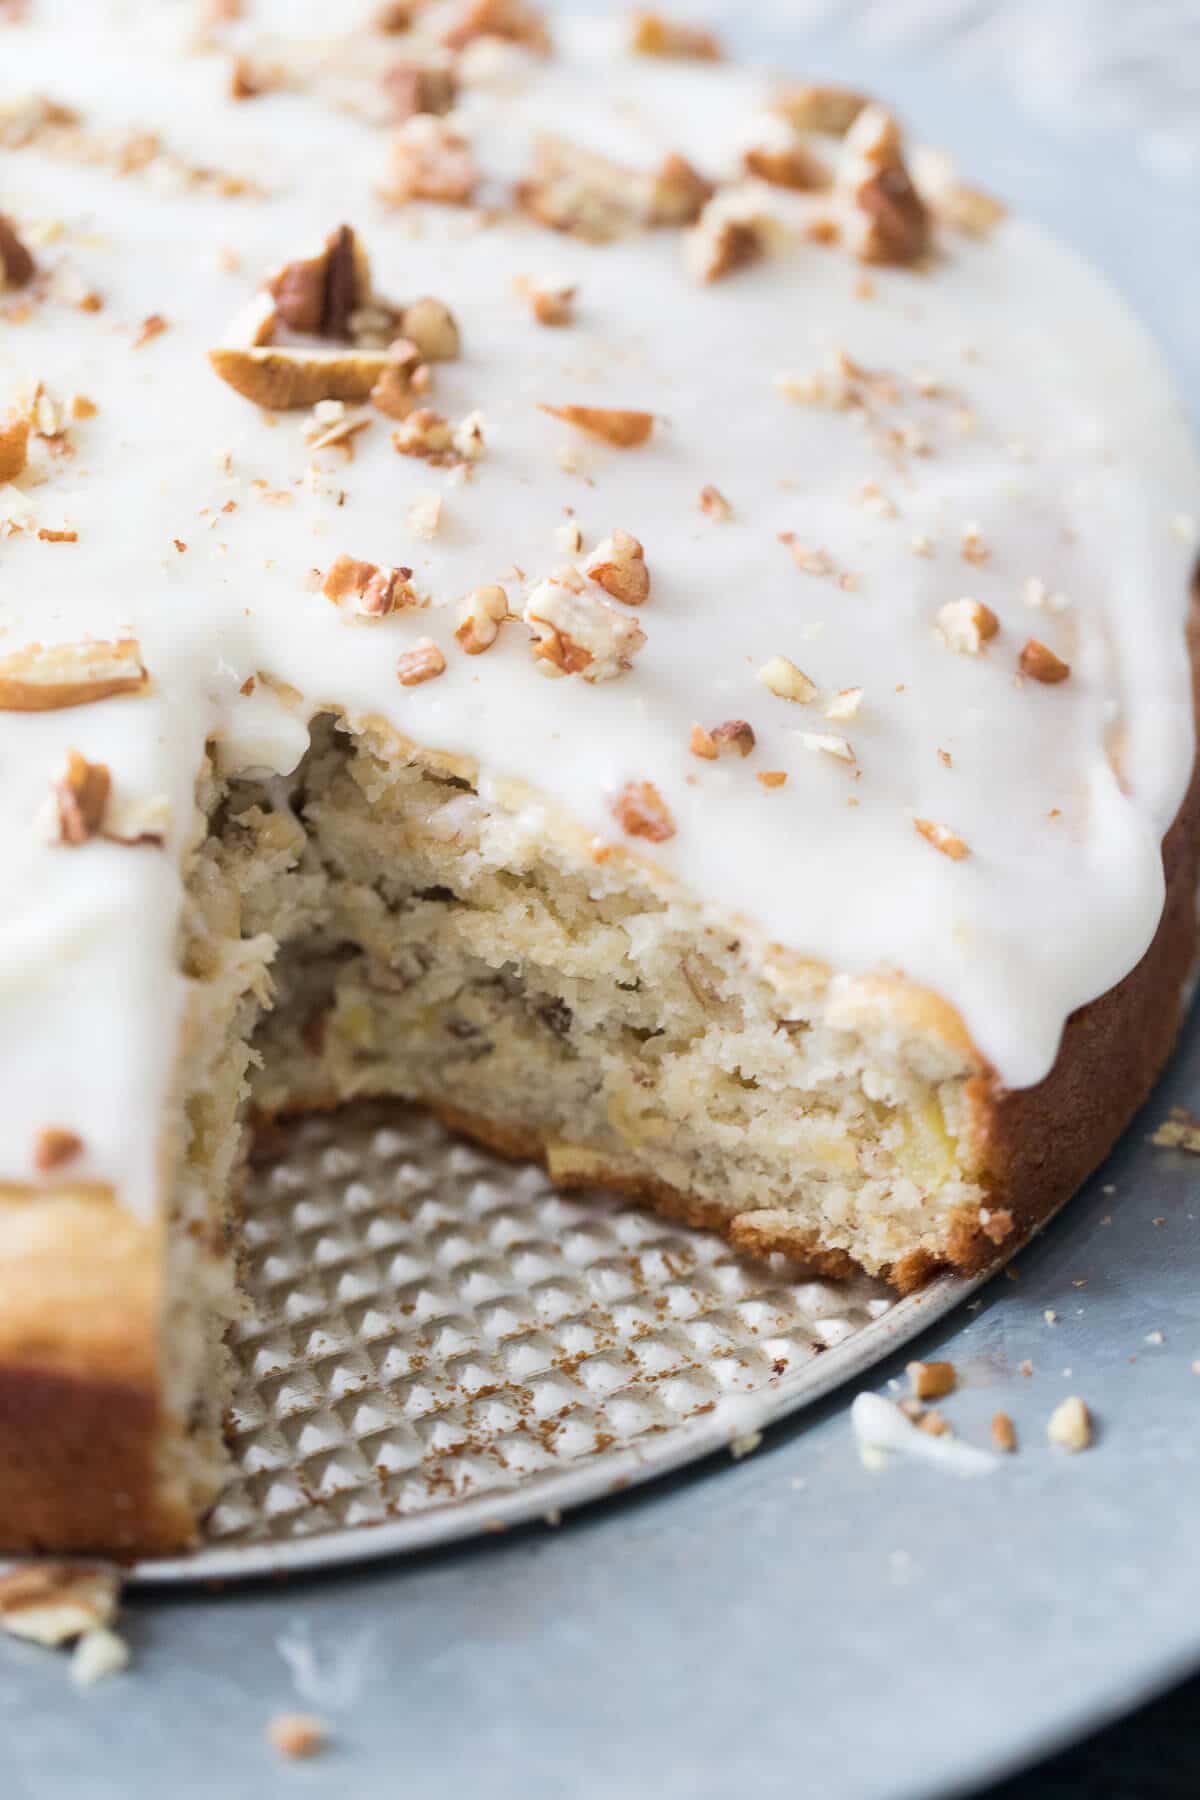 This hummingbird cake recipe is simple to prepare, it's tender and sweet and makes the best coffee cake.